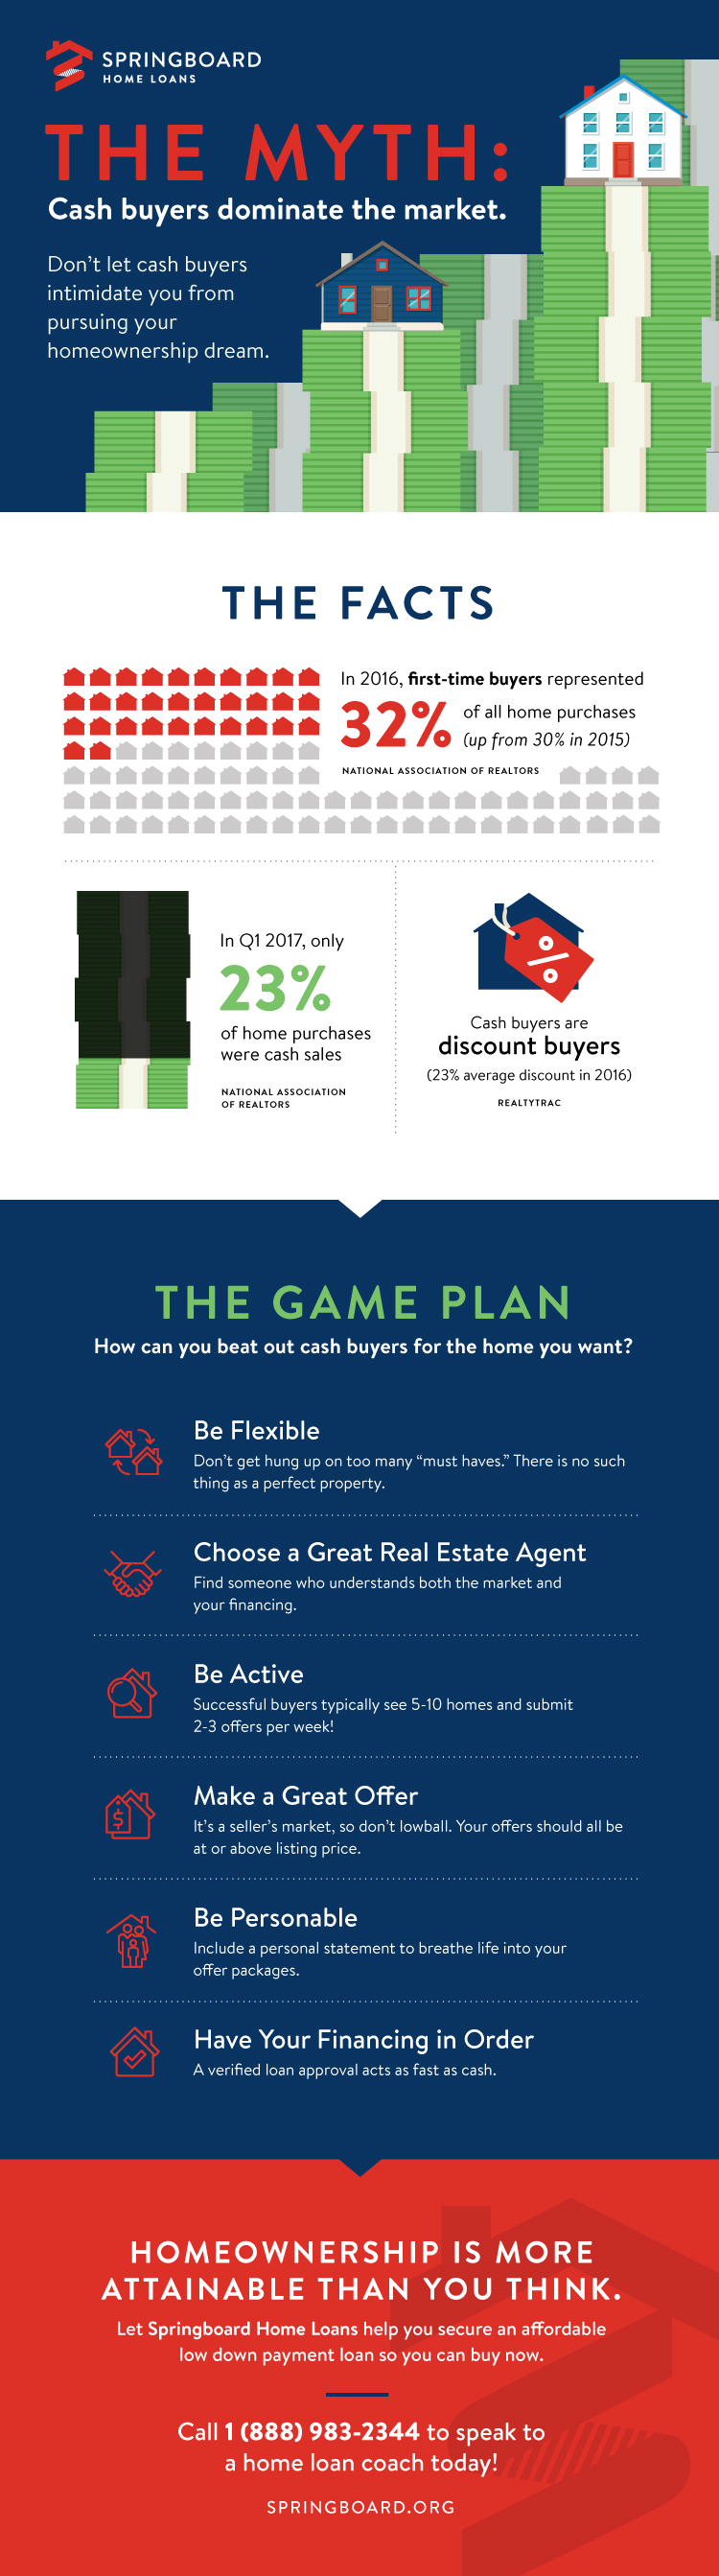 The Myth: Cash Buyers Dominate the Market (Infographic)